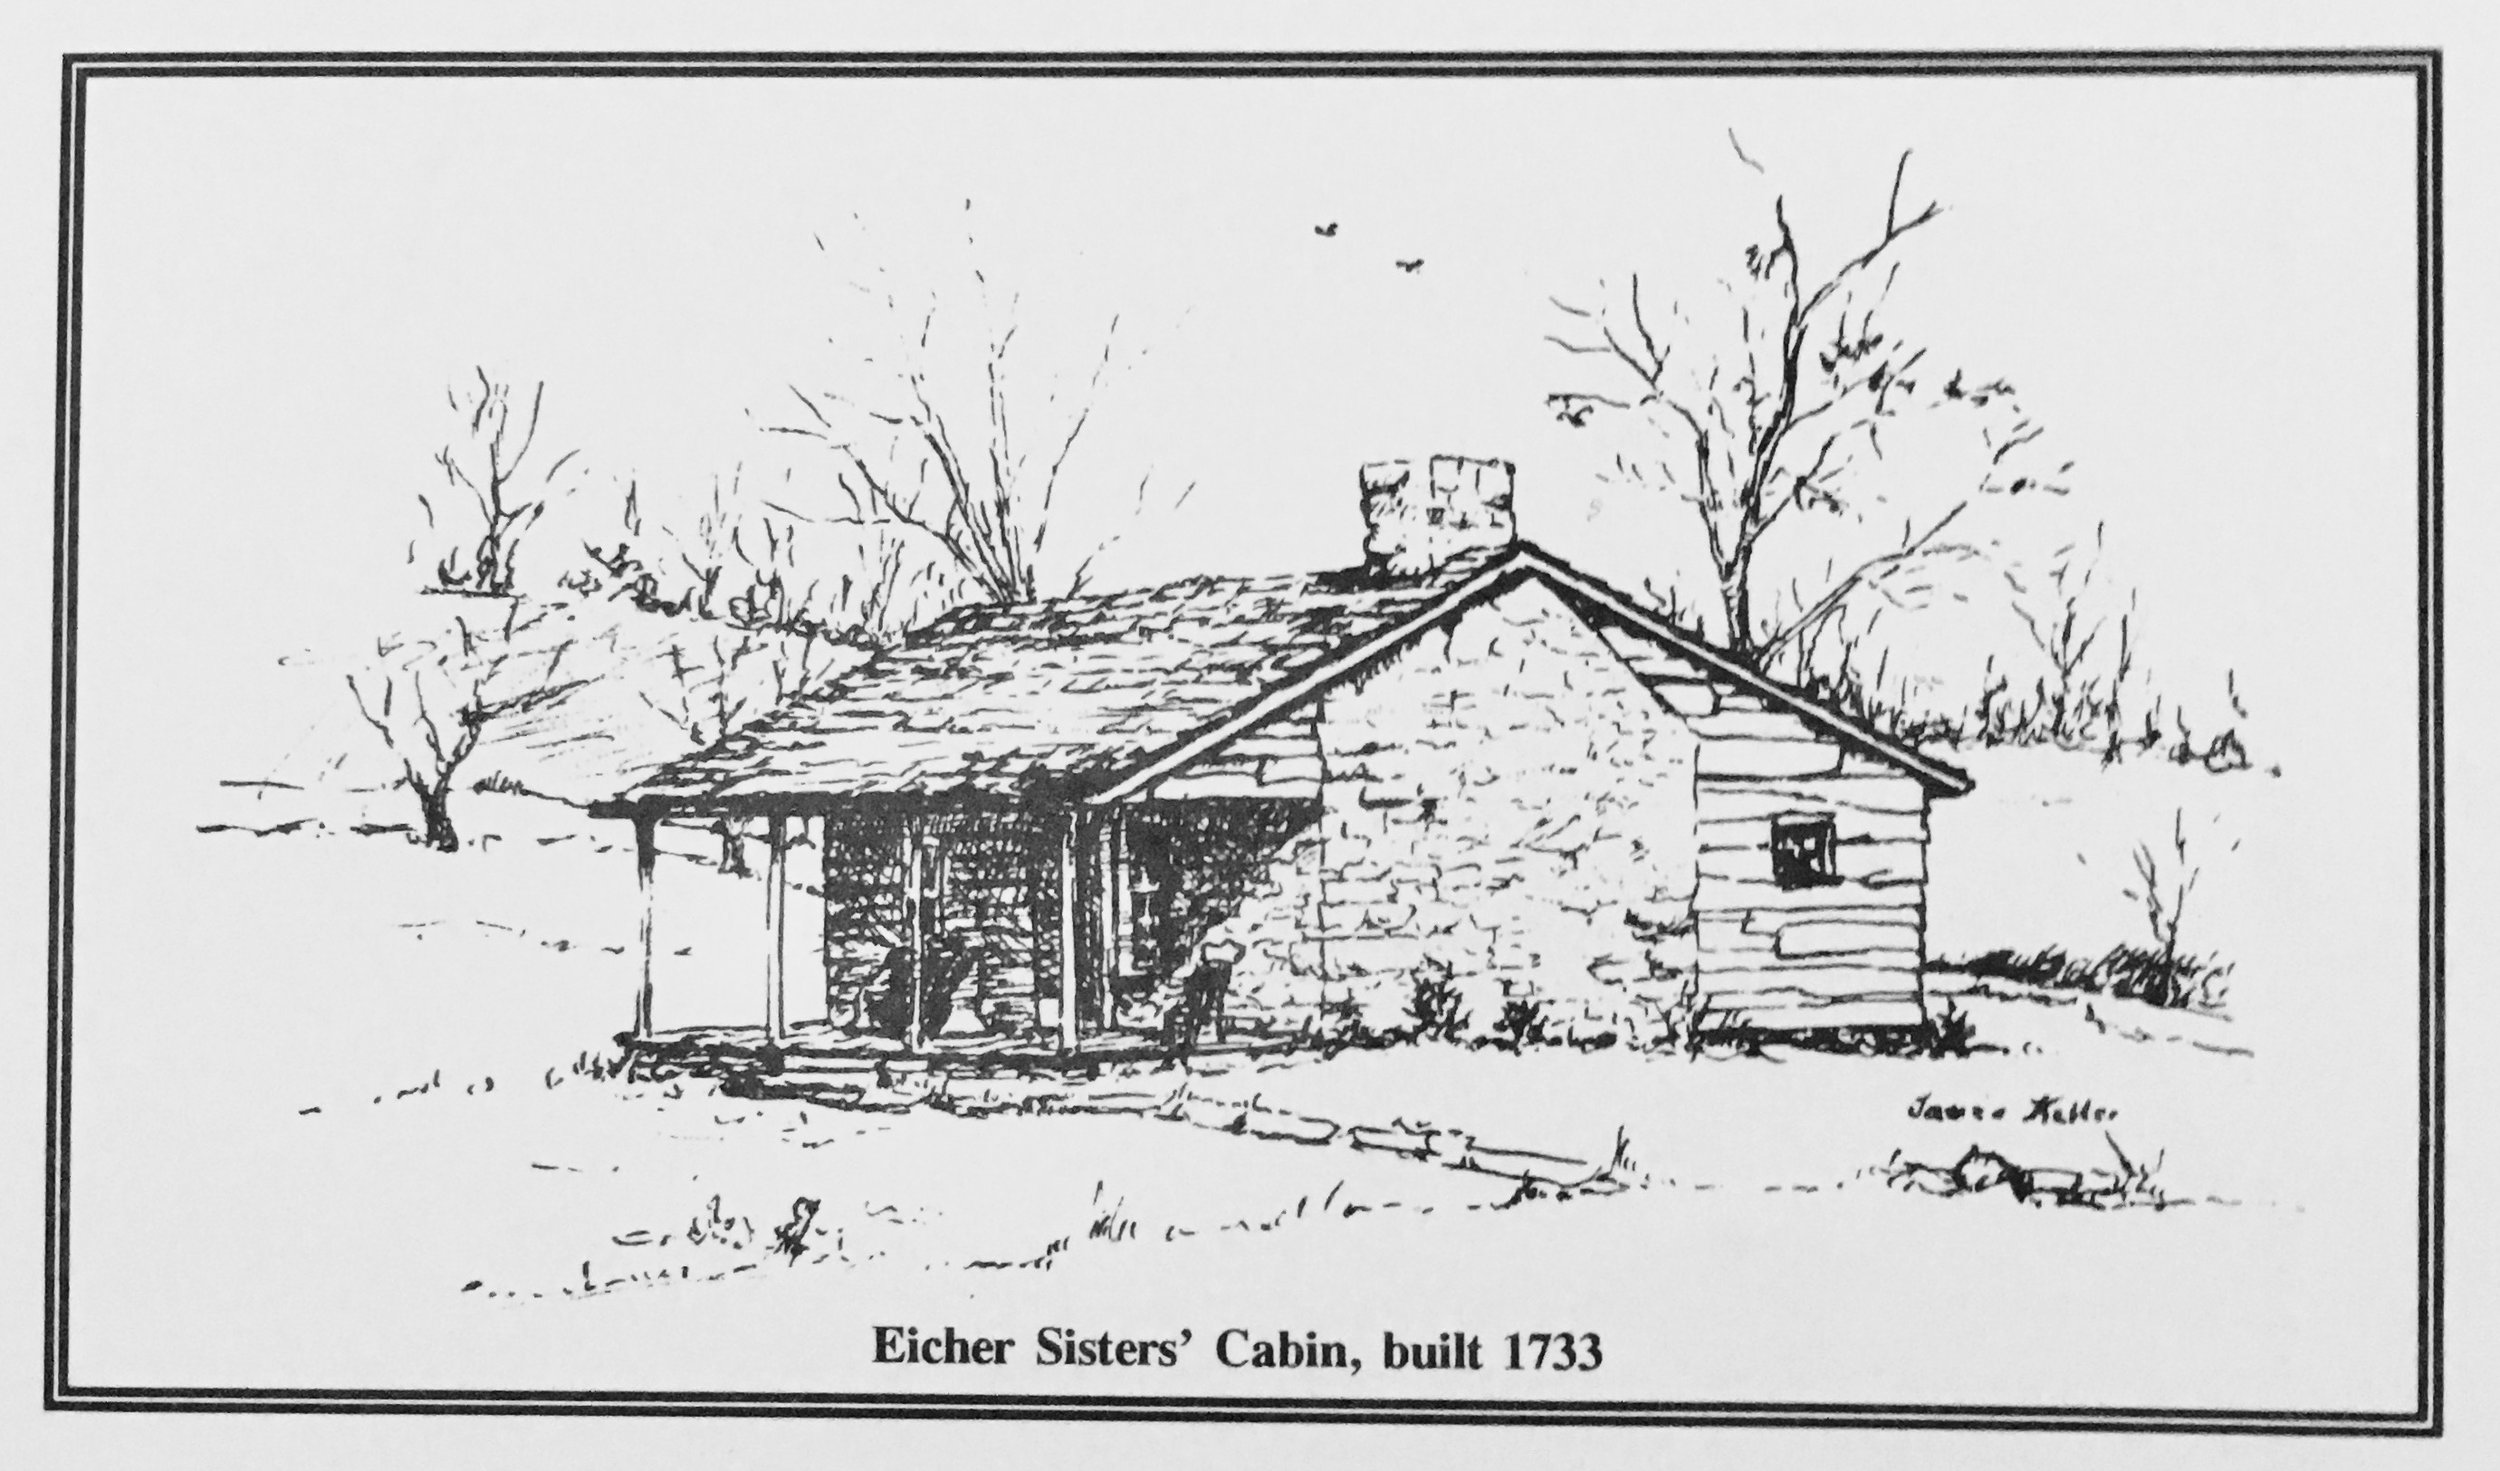  The Eicher Sisters' Cabin is the present day Indian Museum and Shop. 